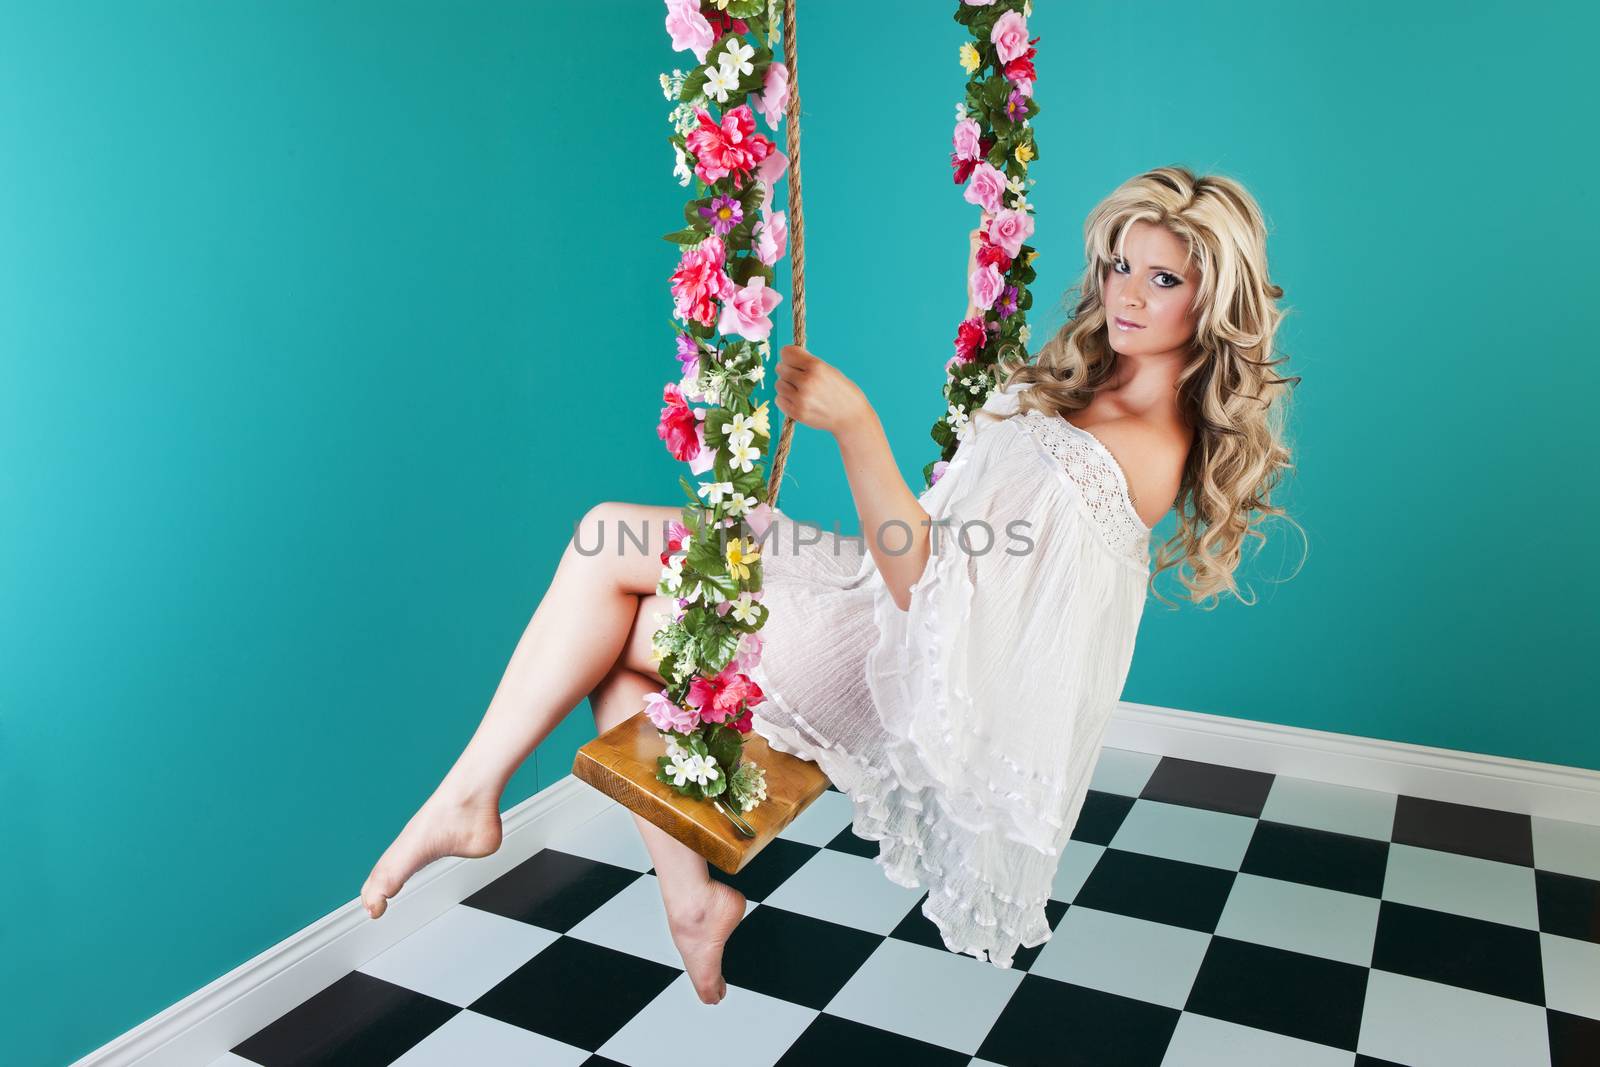 Surreal, fantasy pinup image of a beautiful woman, on a flower covered swing in an empty room.